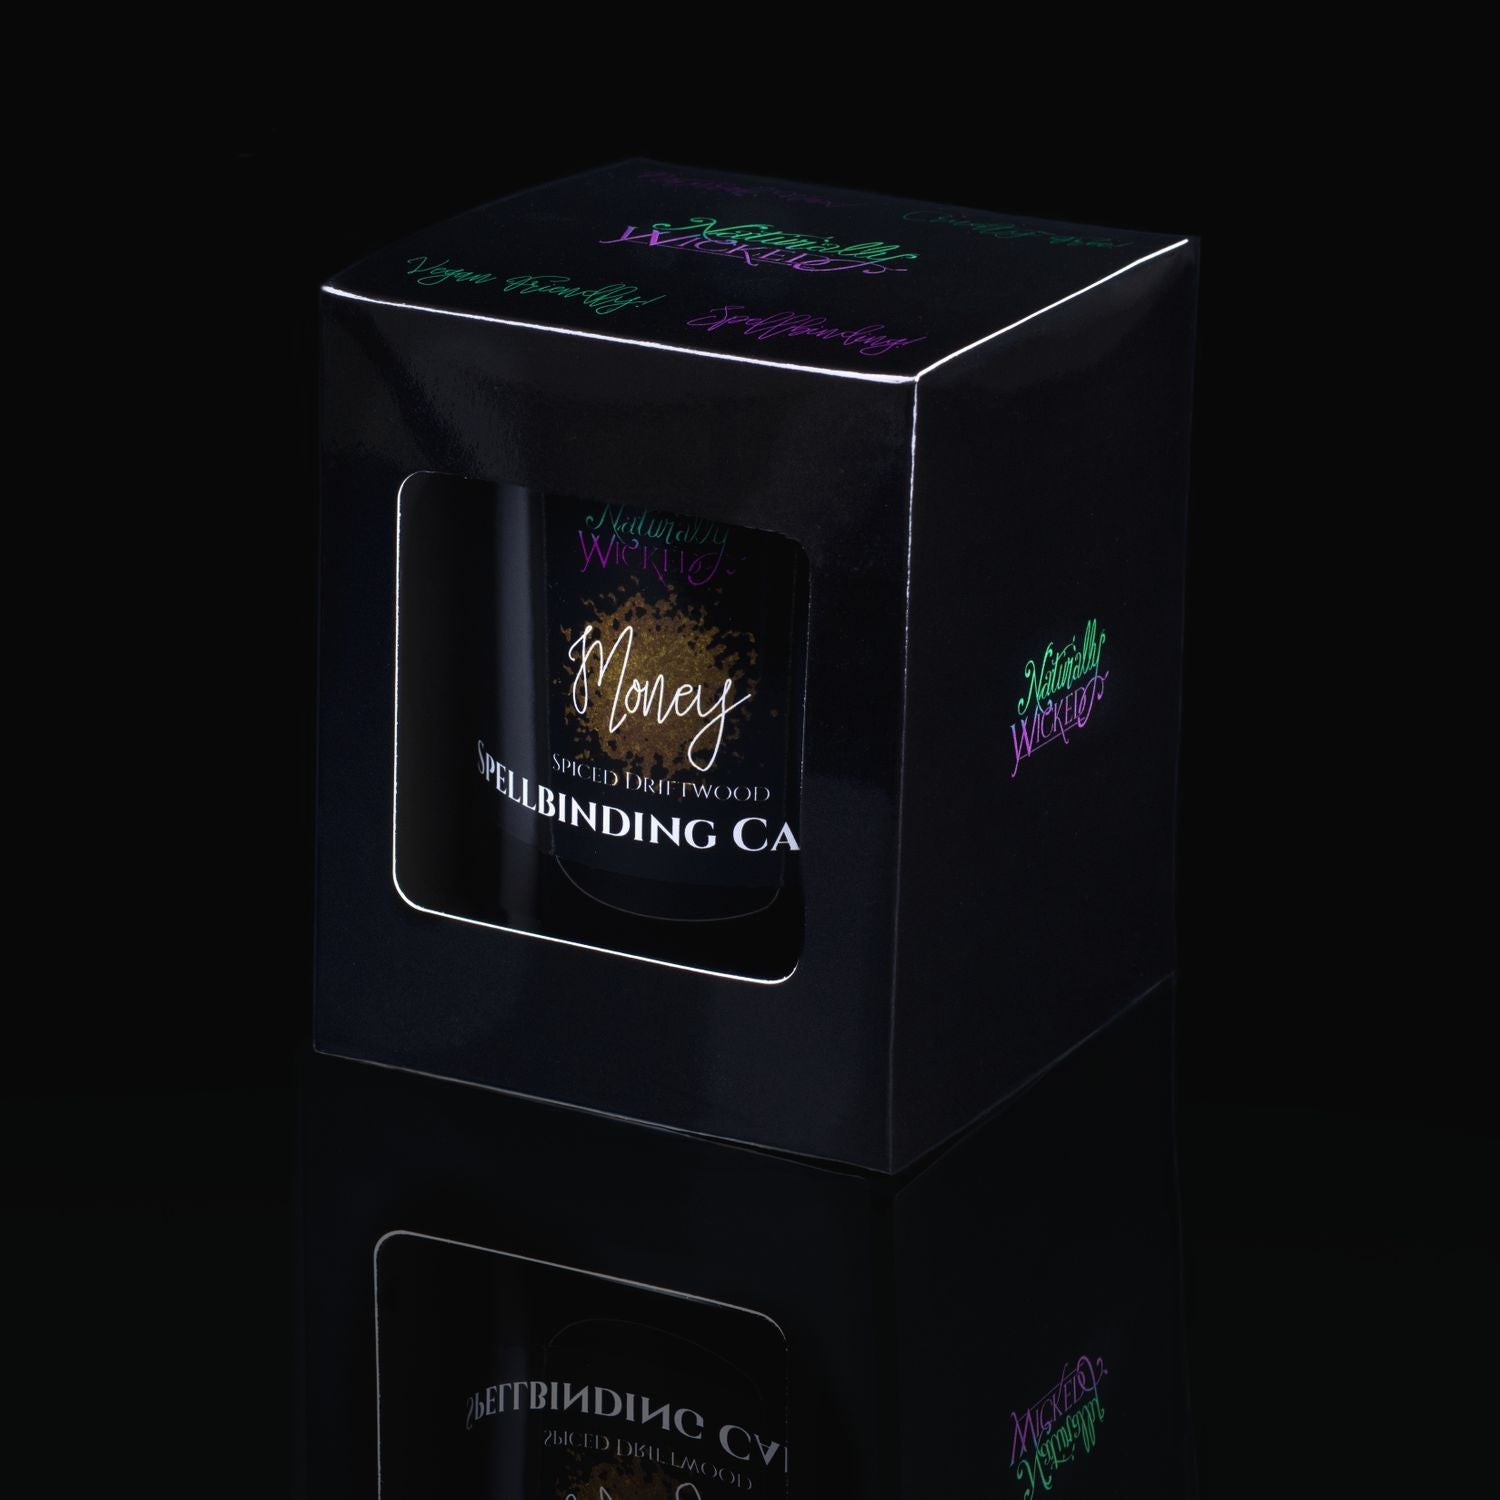 The Perfect Spell Candle For Someone Special To You. Naturally Wicked Spellbinding Money Candle Displayed In A Sleek Black Gloss Gift Box. The Candle Features Plant-Based Smooth Black Wax, A Wood Wick And A Beautiful Black Onyx Crystal.